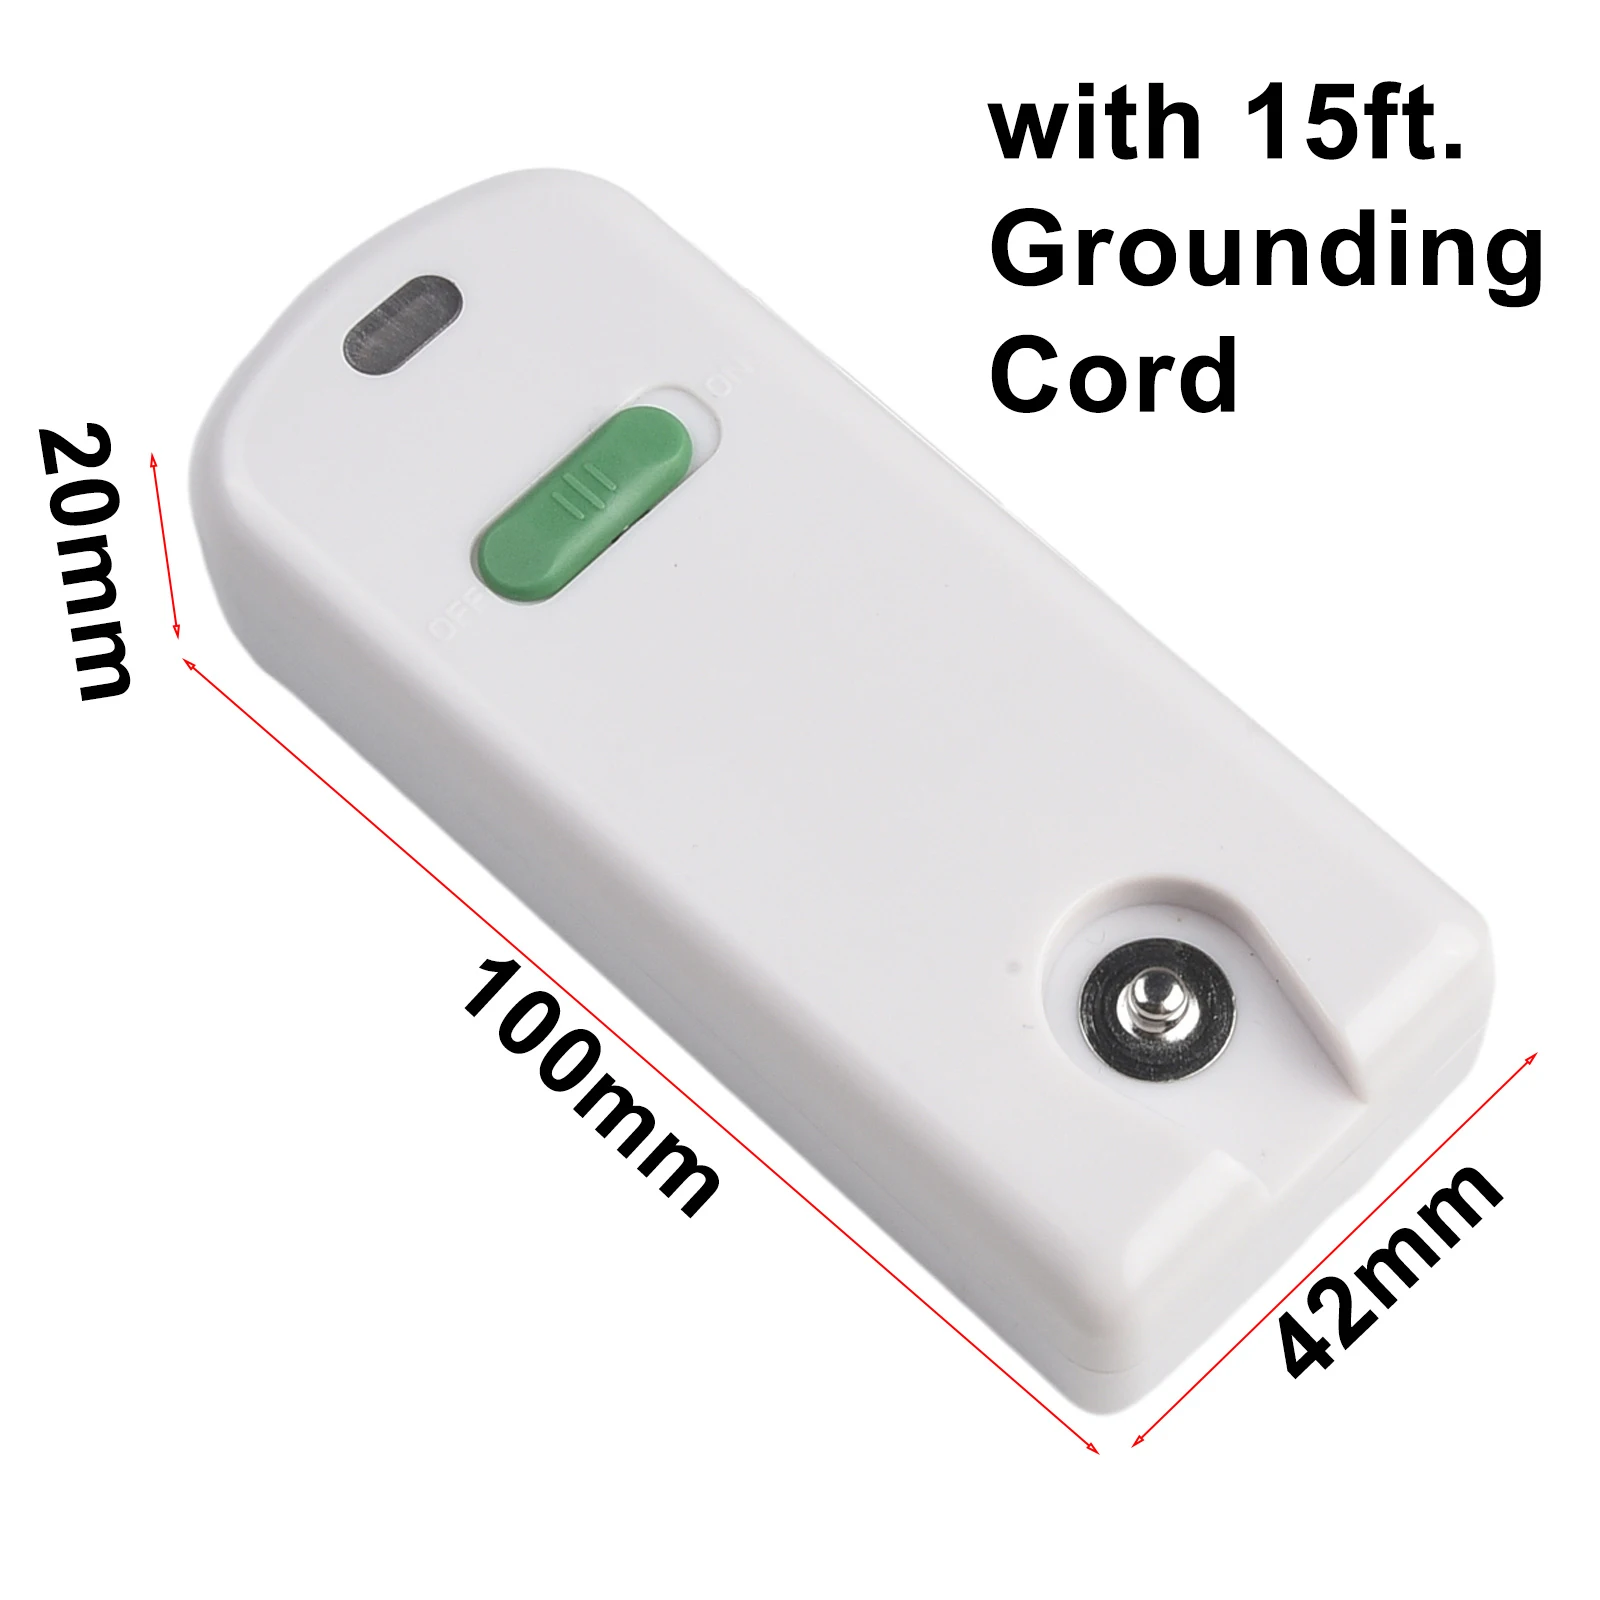 

Continuity Tester Earthing Products Accurate Grounding Tester Earth Earthing Products Features Grounding Continuity Tester White